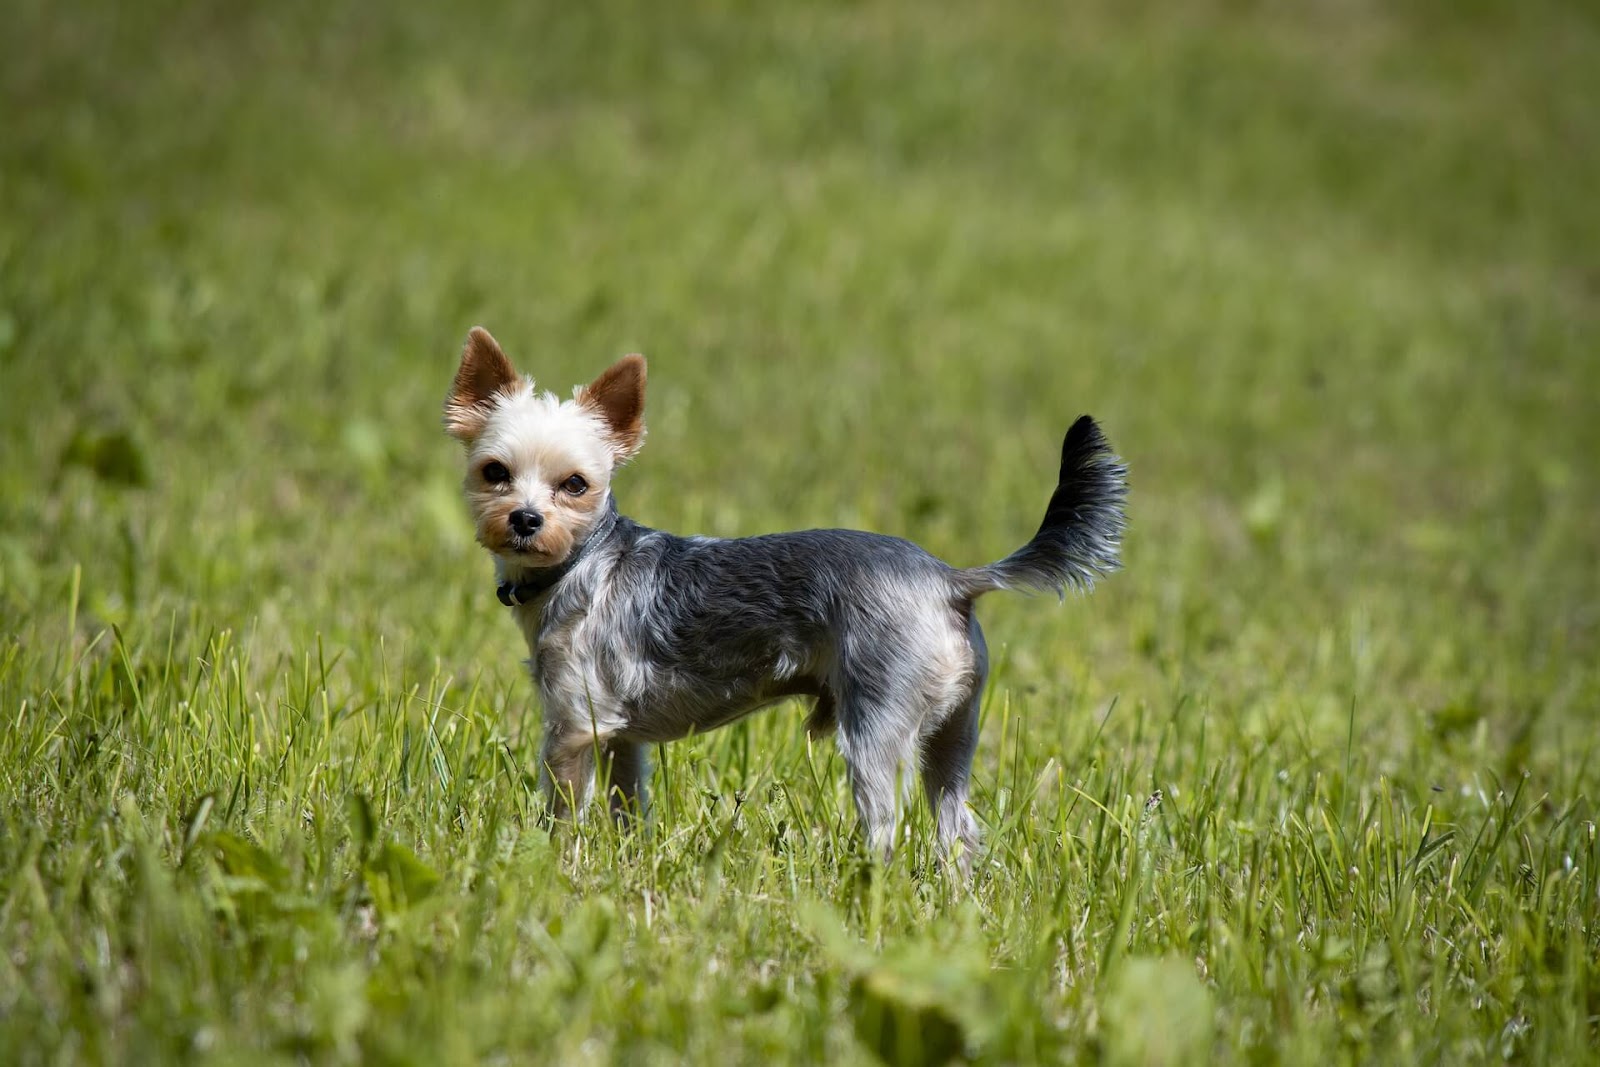 How Fast Can a Yorkie Run?
